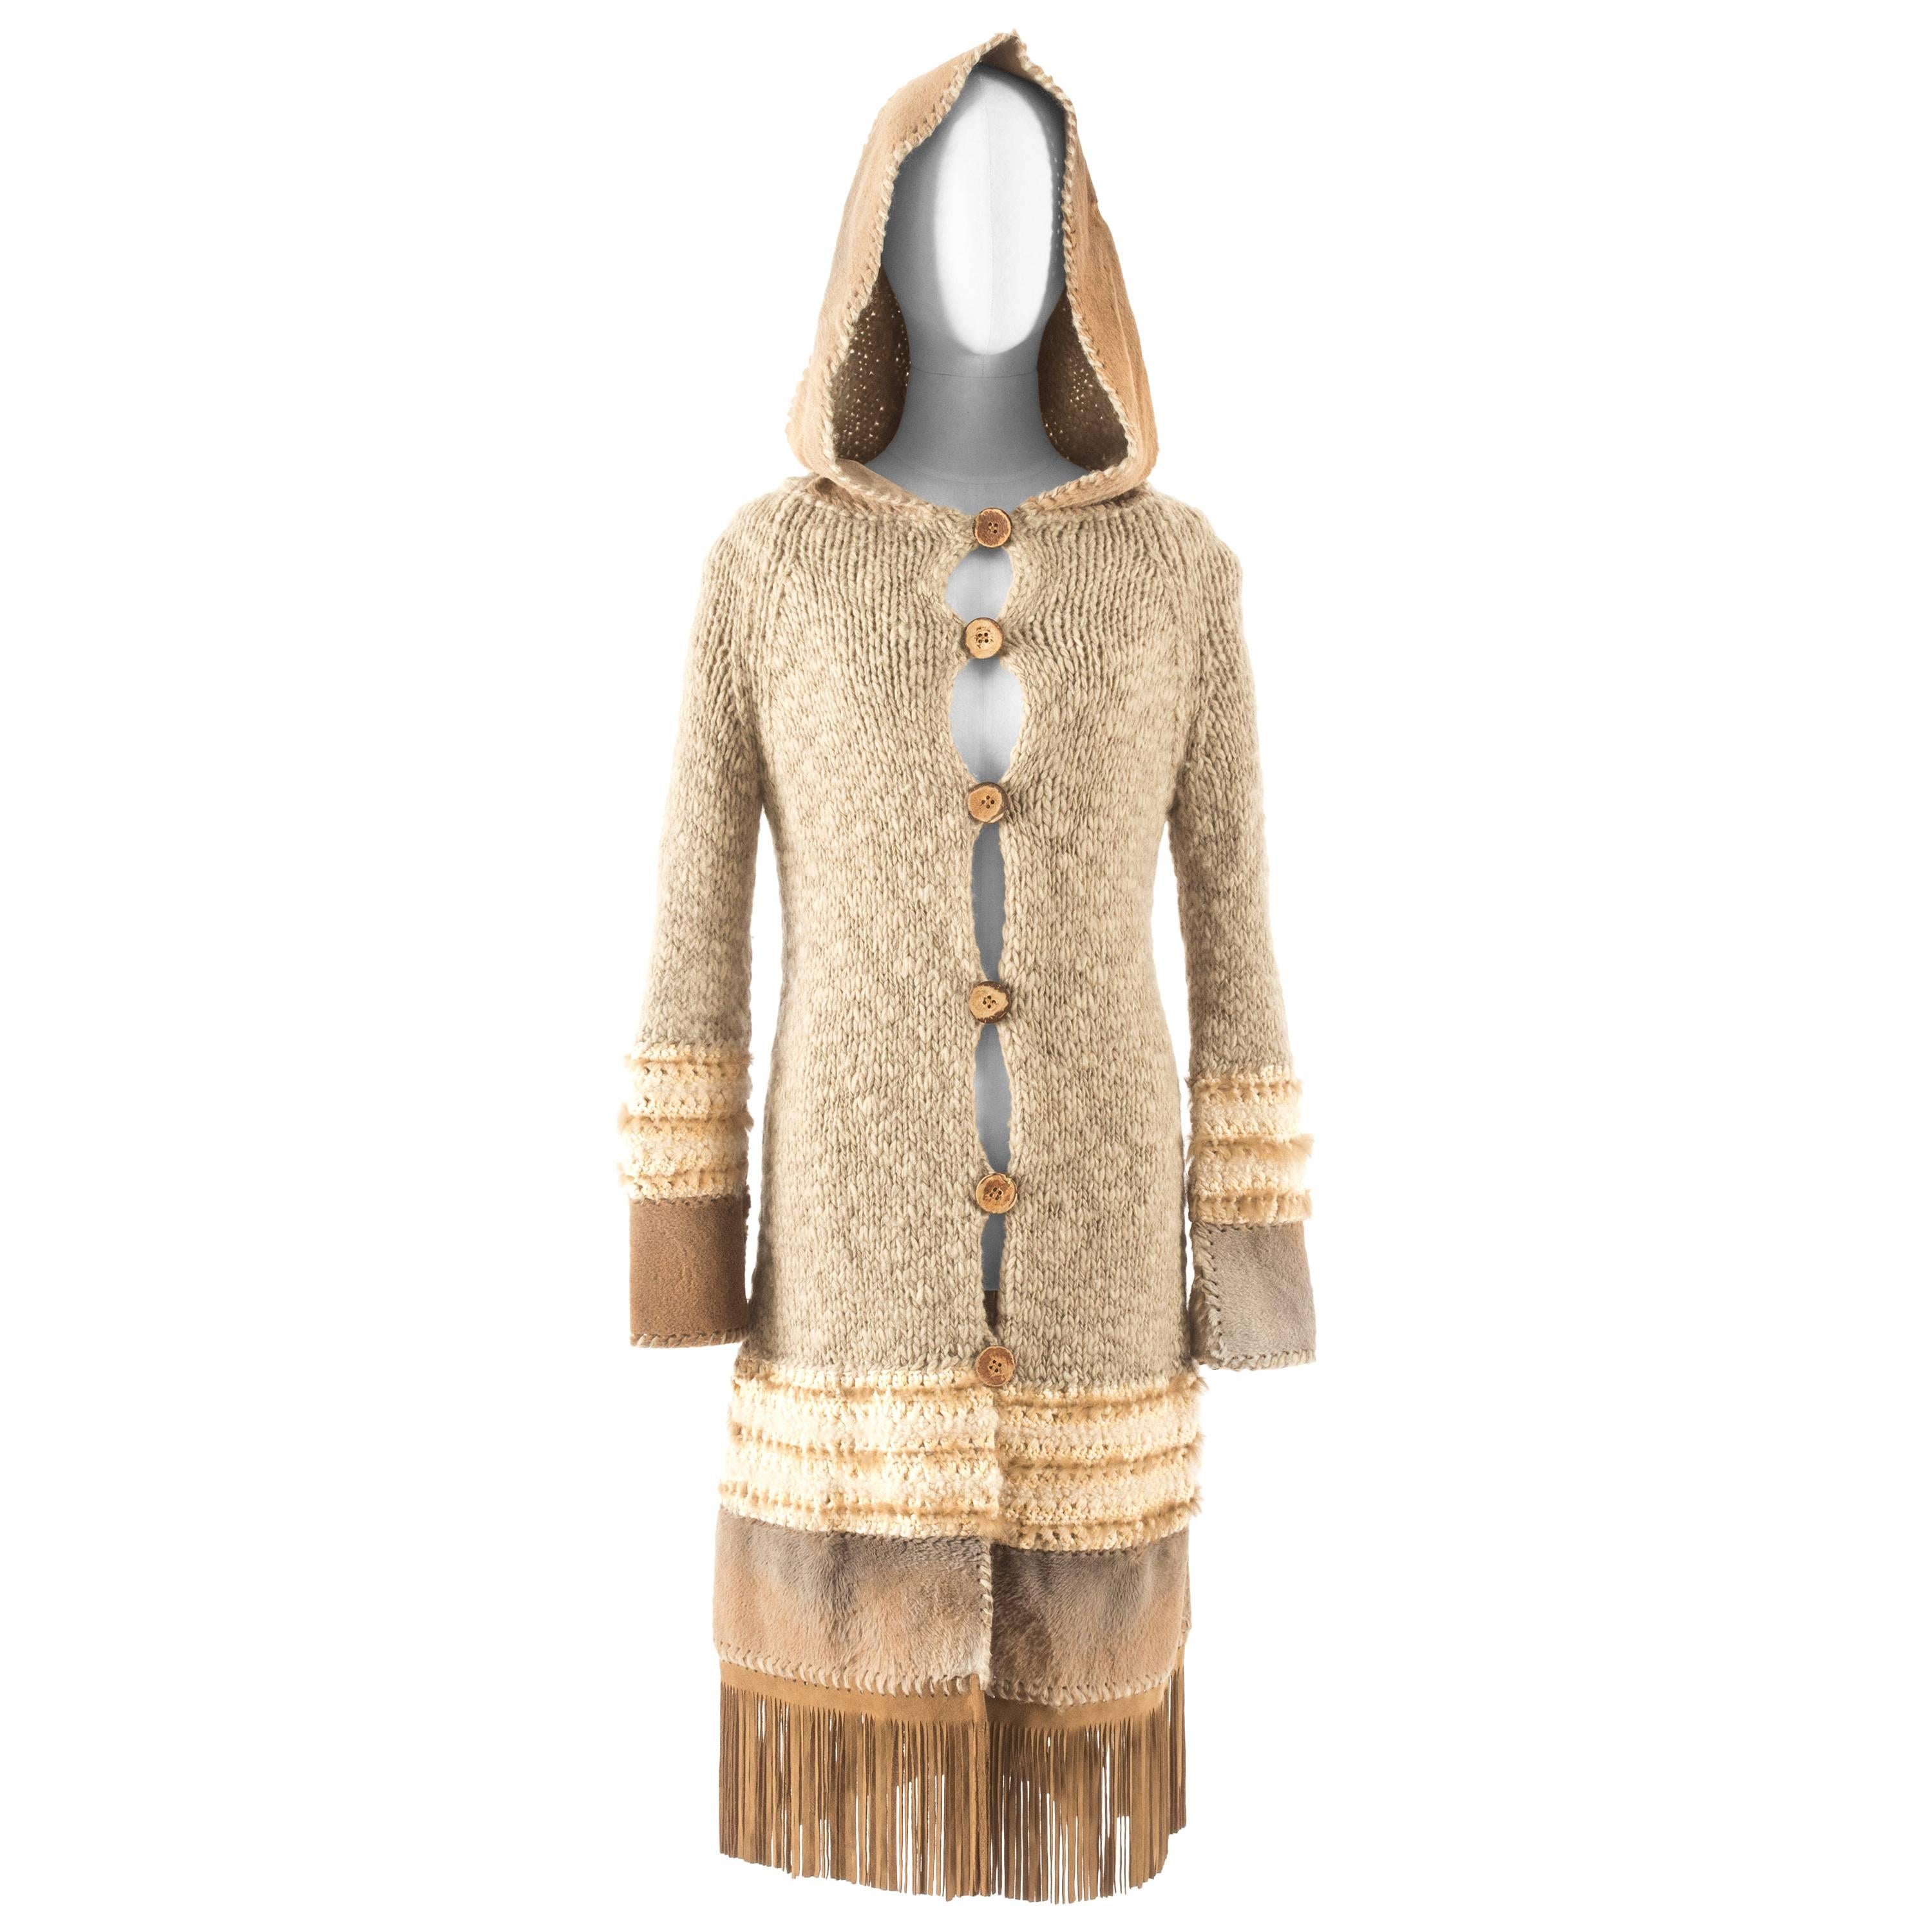 Christian Dior hooded oatmeal knitted jacket with rabbit fur and suede tassels 